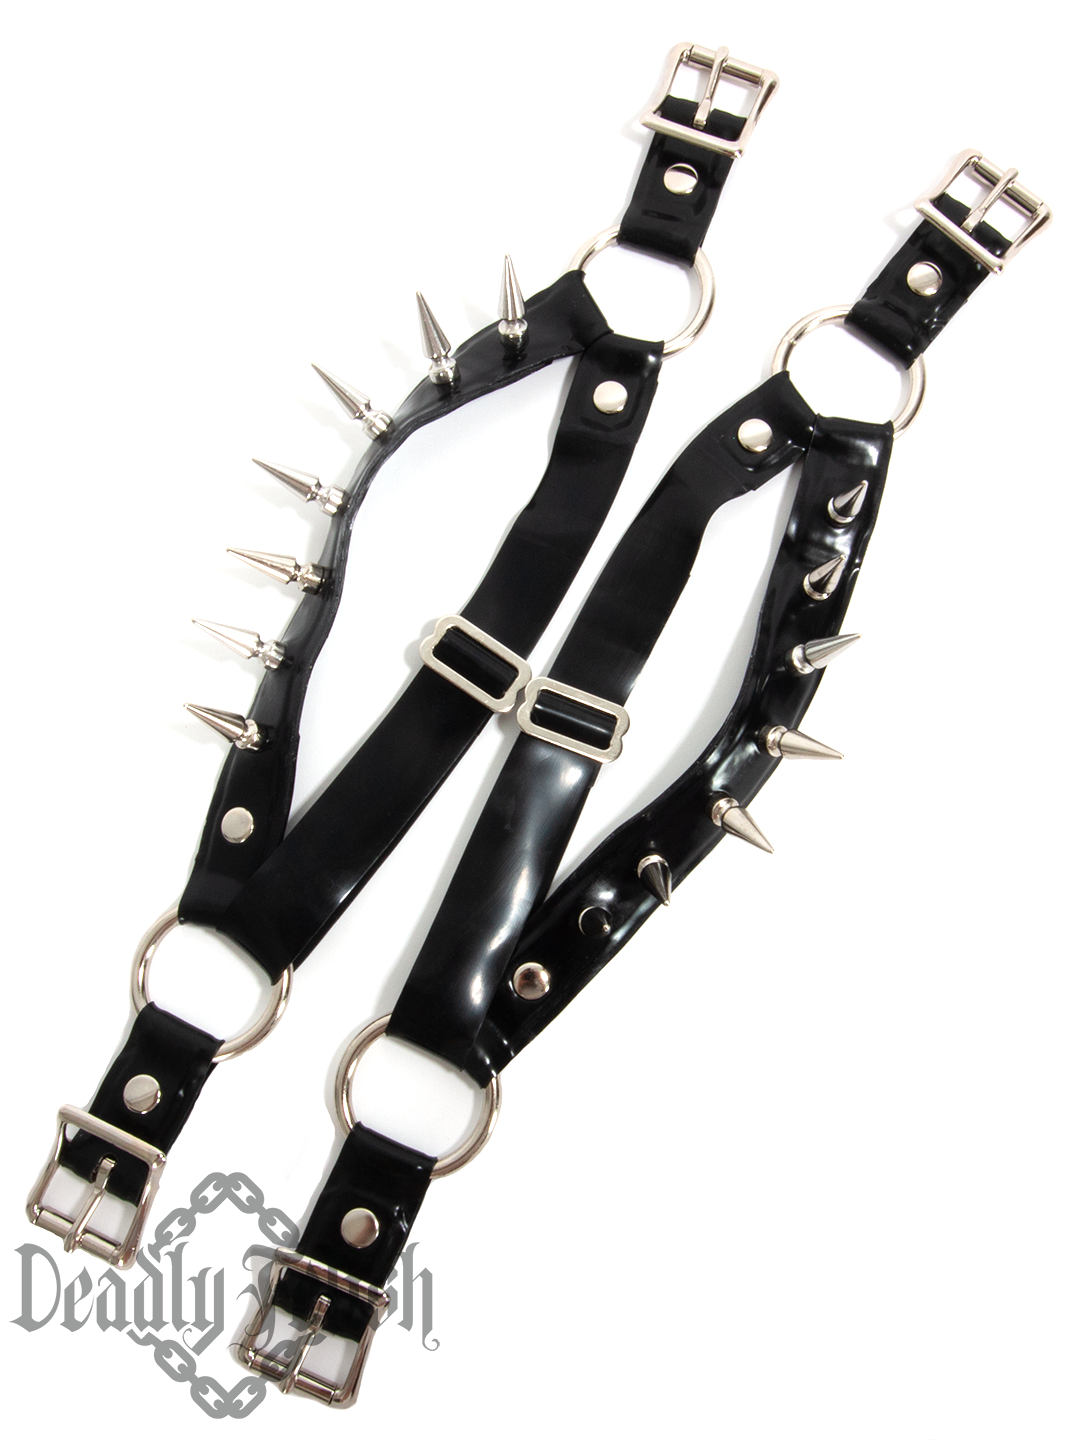 Deadly Fetish Made-To-Order Latex: Harness Addition #25 Spiked Leg Straps